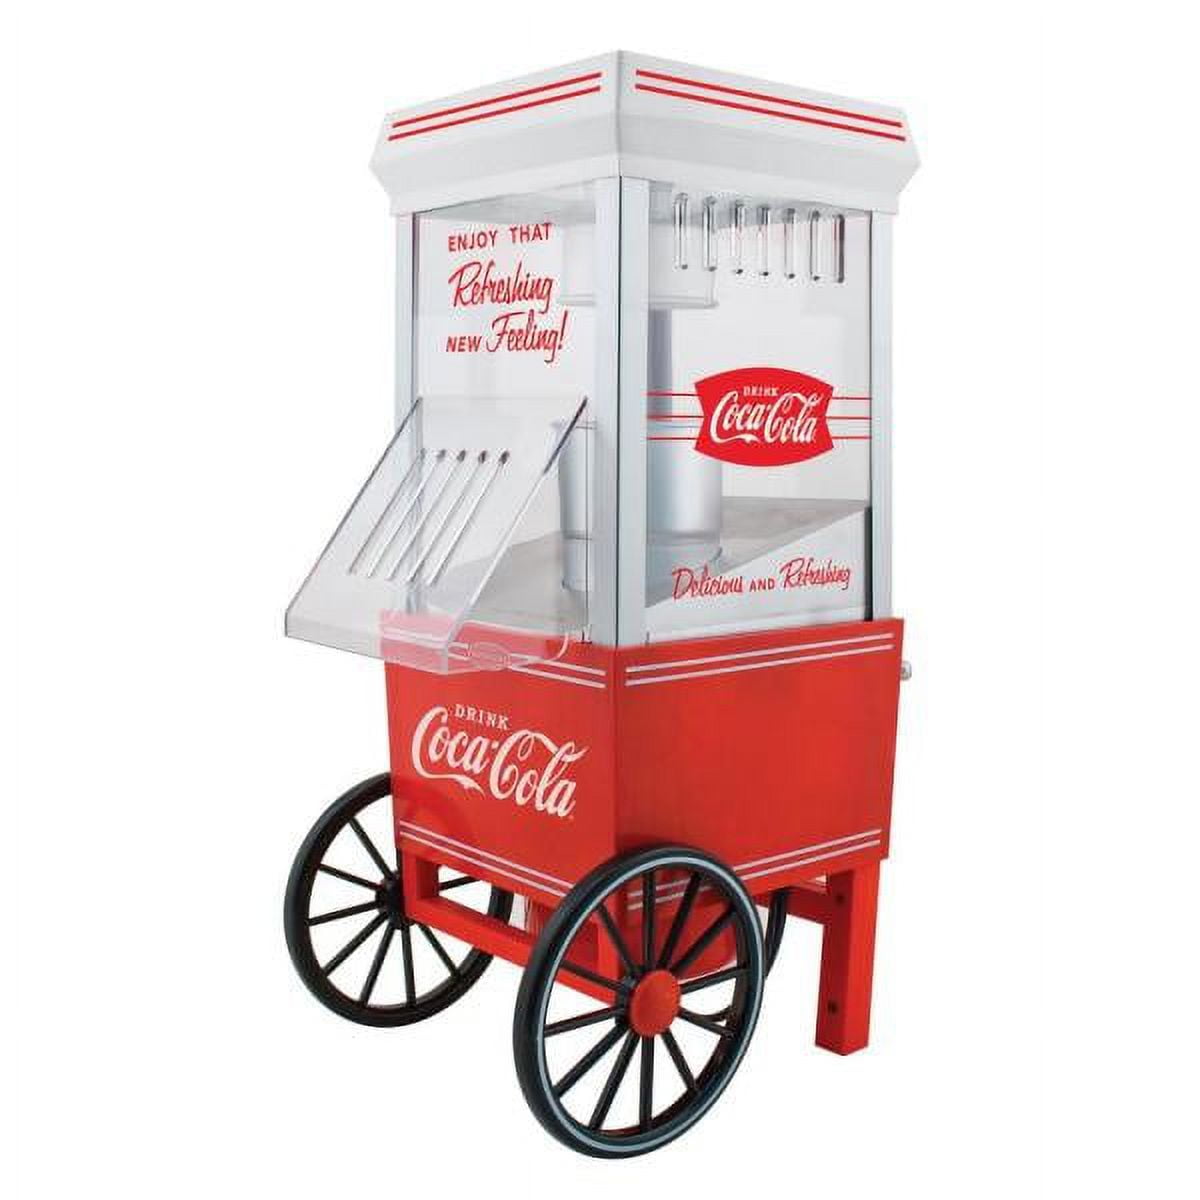 Nostalgia 53-Inch Popcorn Cart with Candy Dispenser, Red, NKPCRTCD8RD